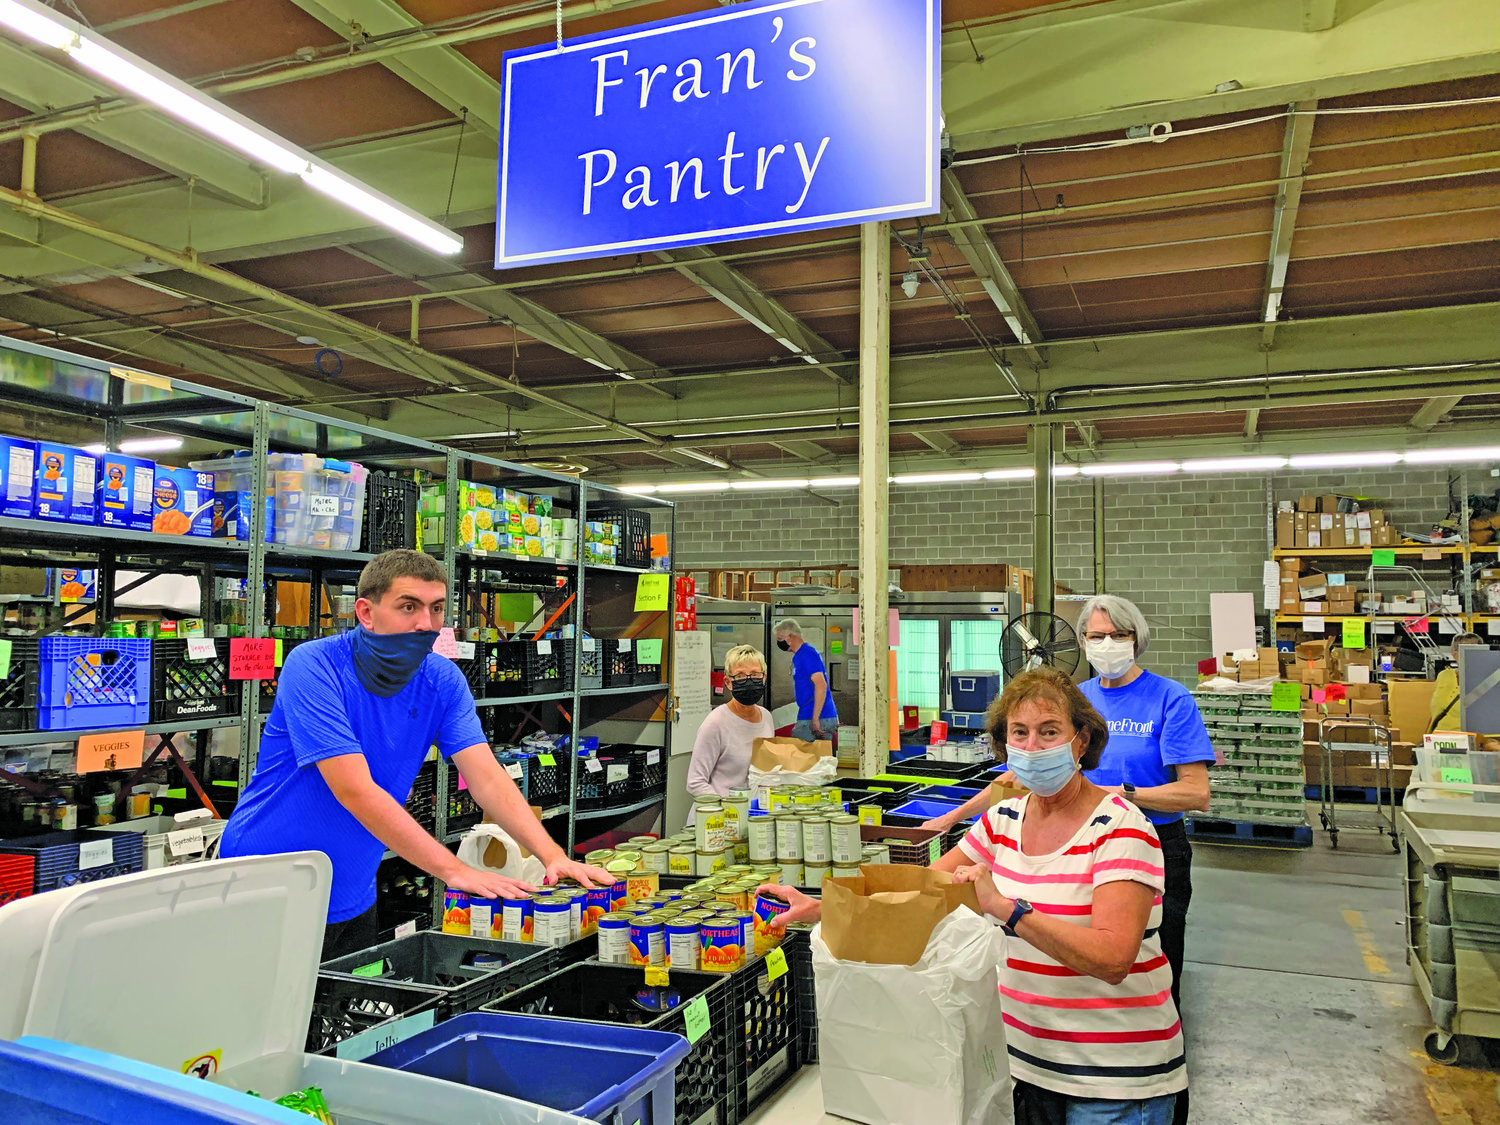 Community members volunteering in “Fran’s Food Pantry” at HomeFront, including Barbara Carberry from Yardley, back left,,  Hunter Elkins, front left, Madeline Lightman, front right,  from WW-P, and Donna Famoso, back right,  from Hamilton Square.